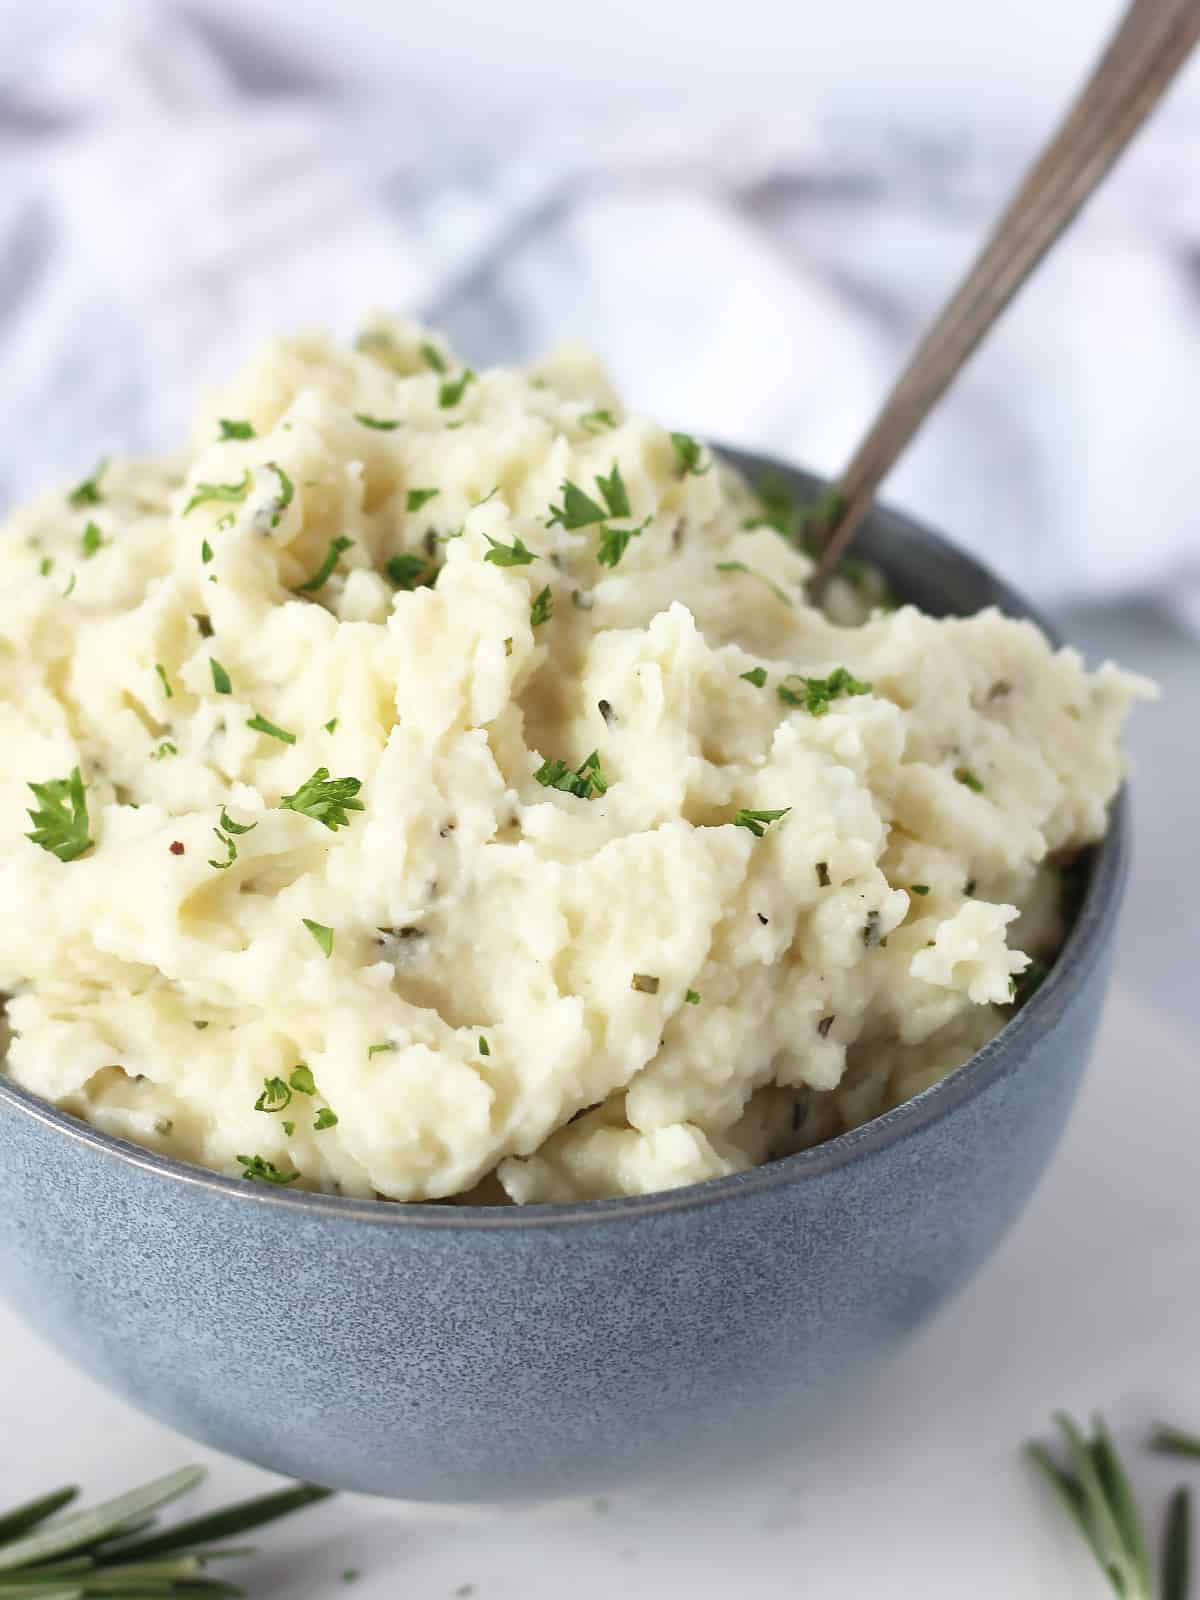 Fluffy and creamy mash served in a bowl.